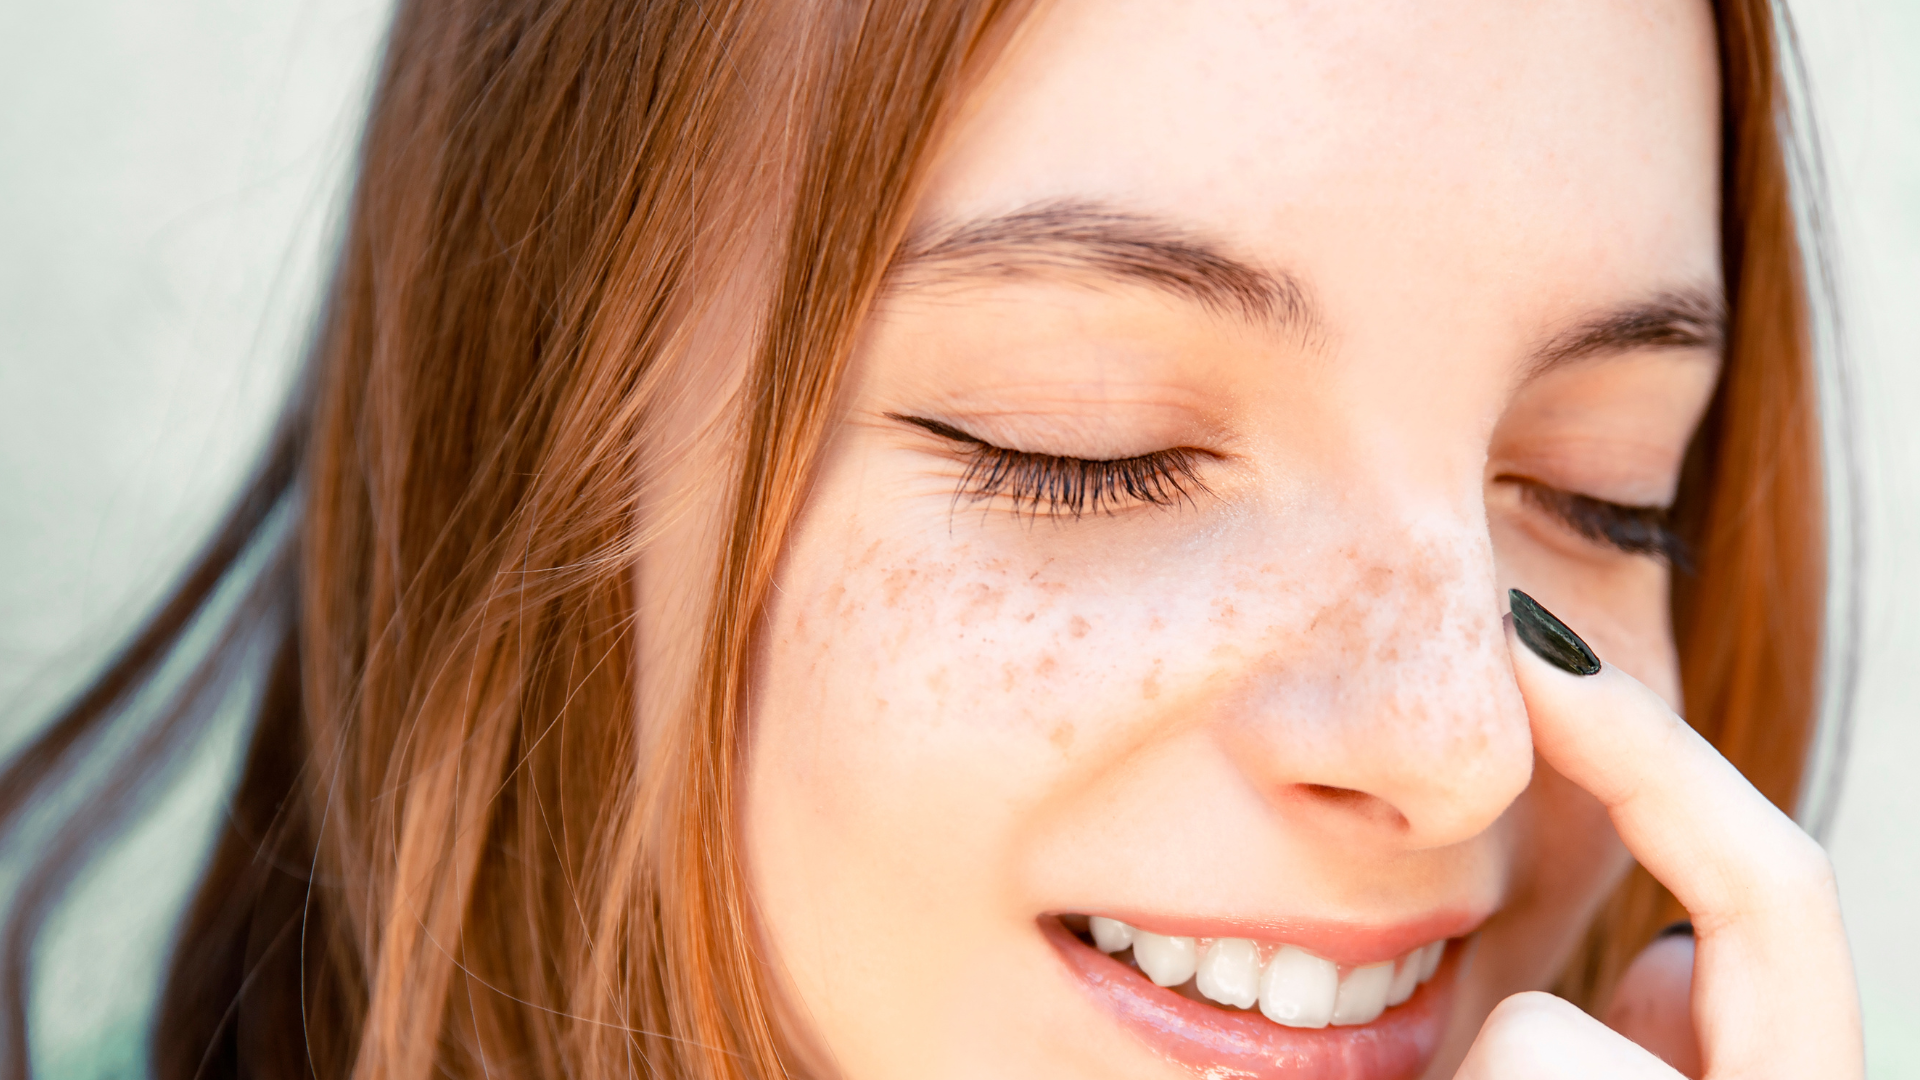 How Redheads Can Conceal or Get Rid of Hyperpigmentation